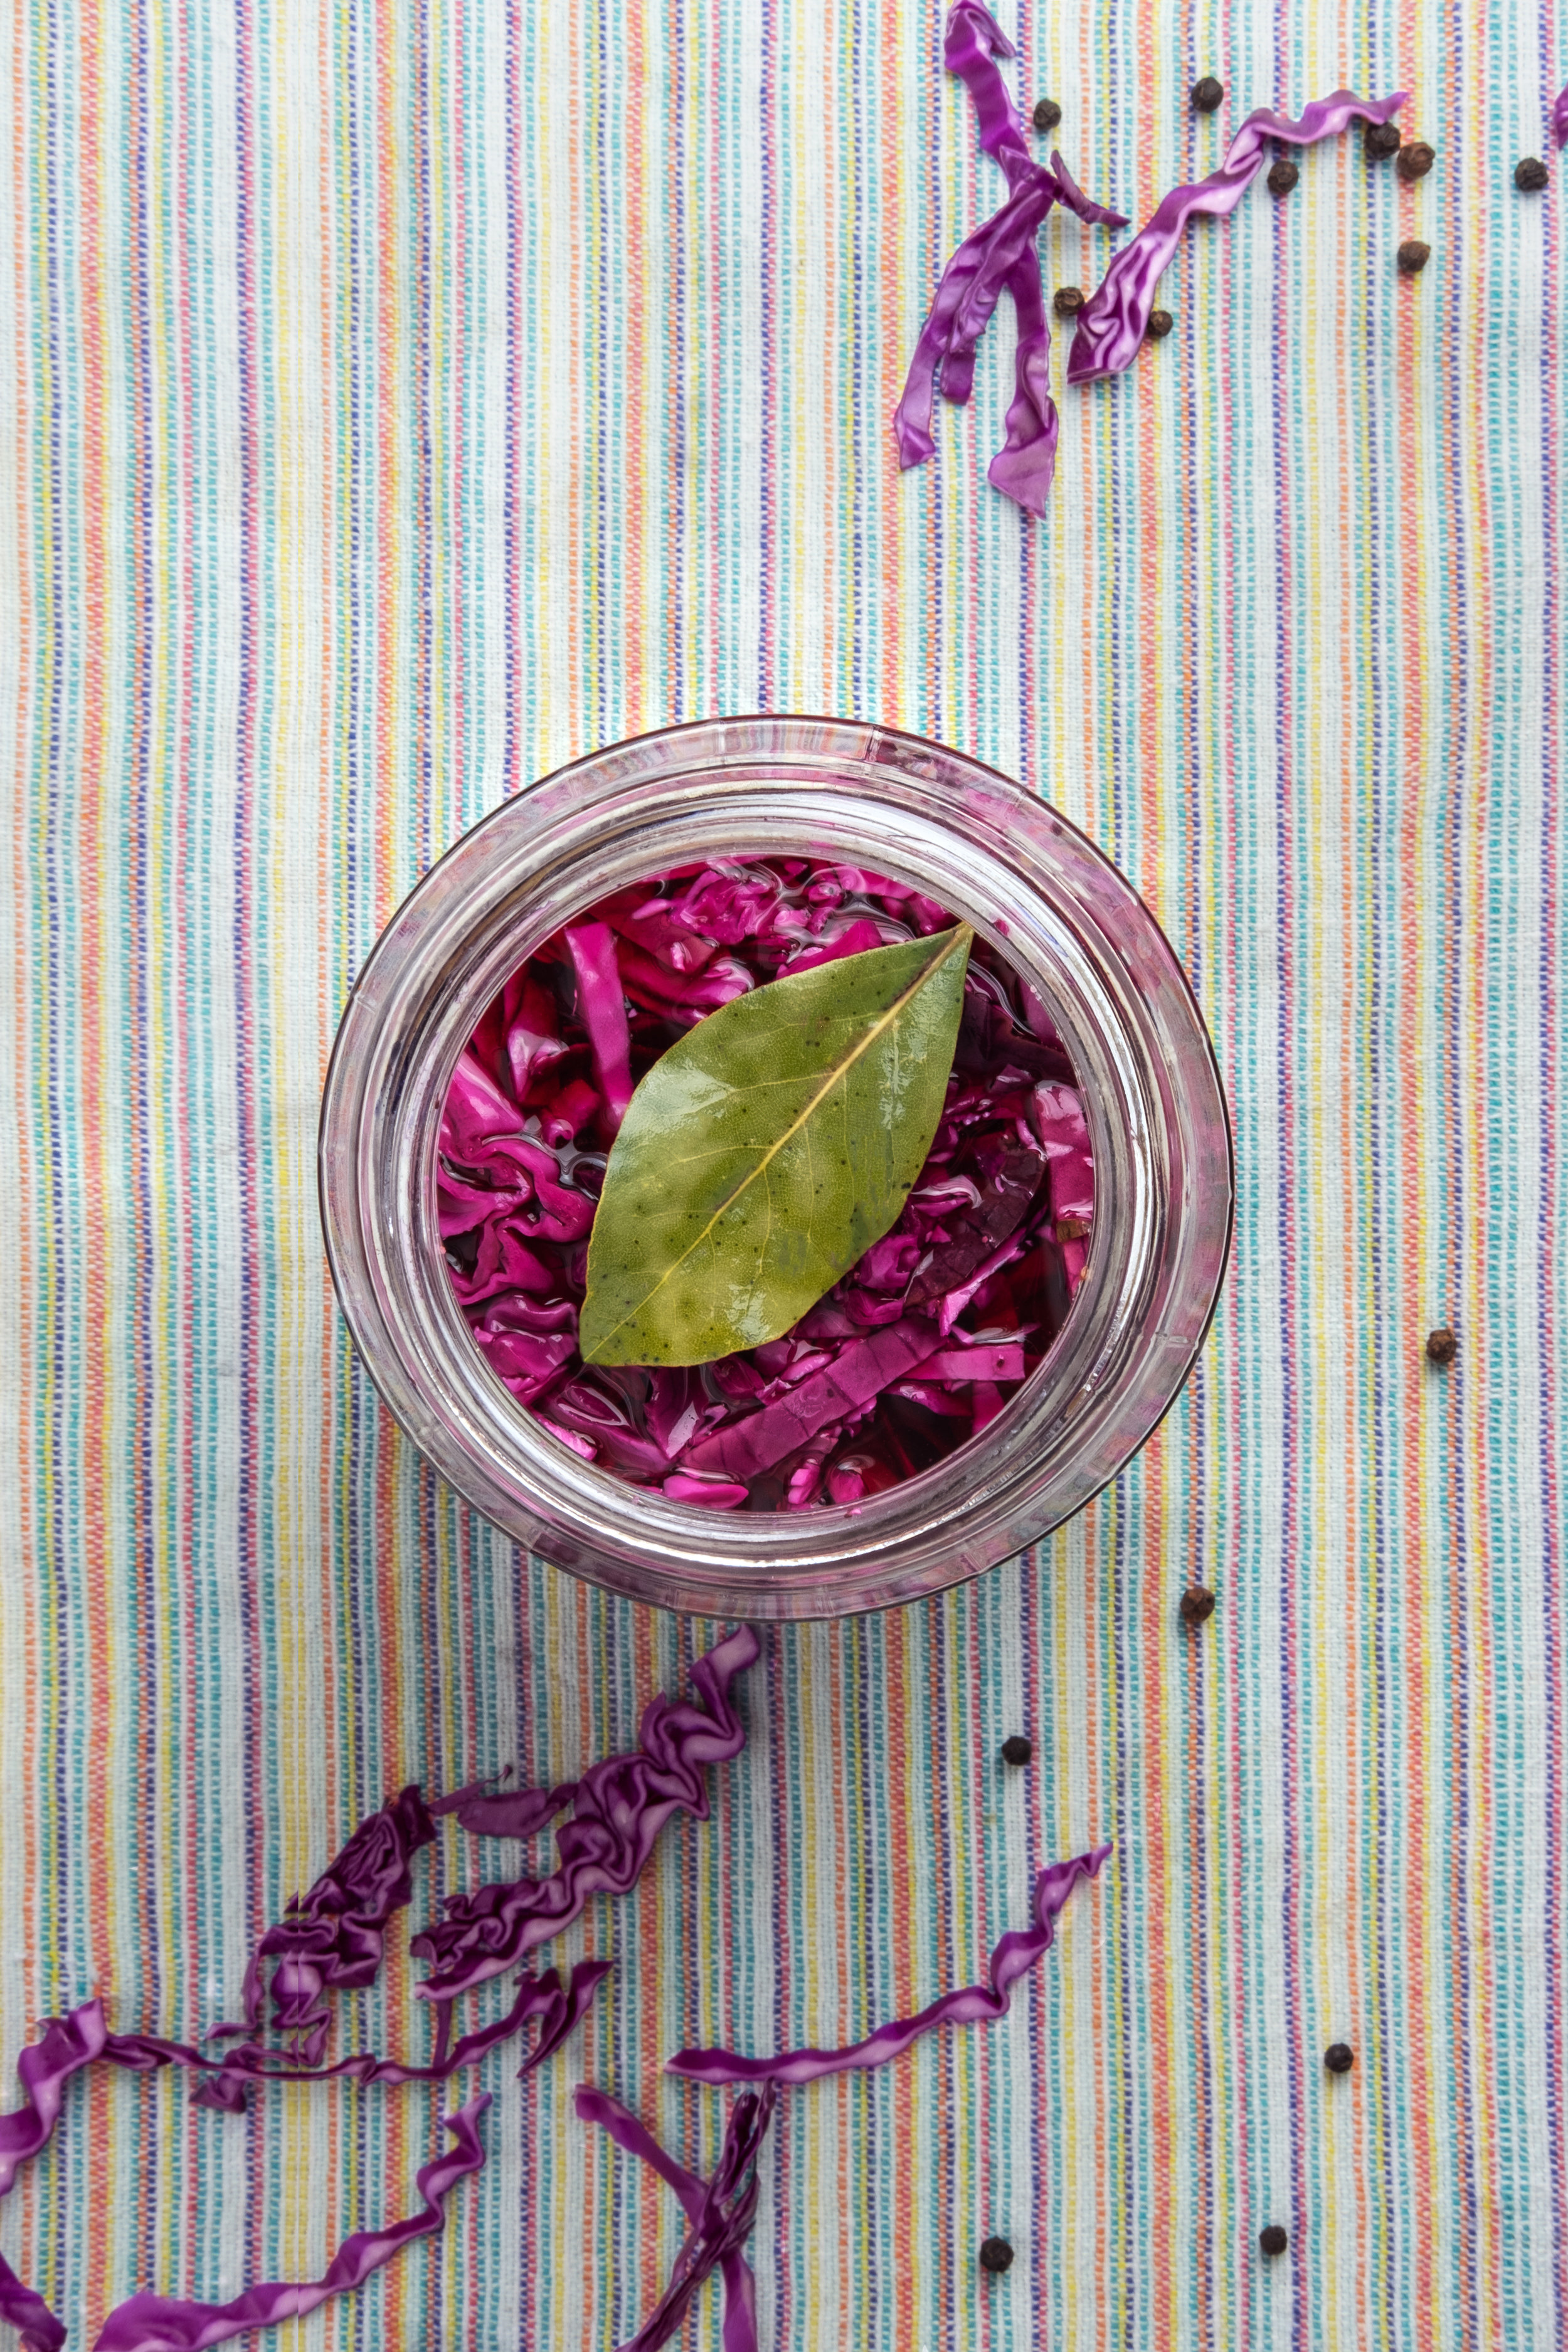  Glass jar of red pickled cabbage on a striped napkin. 